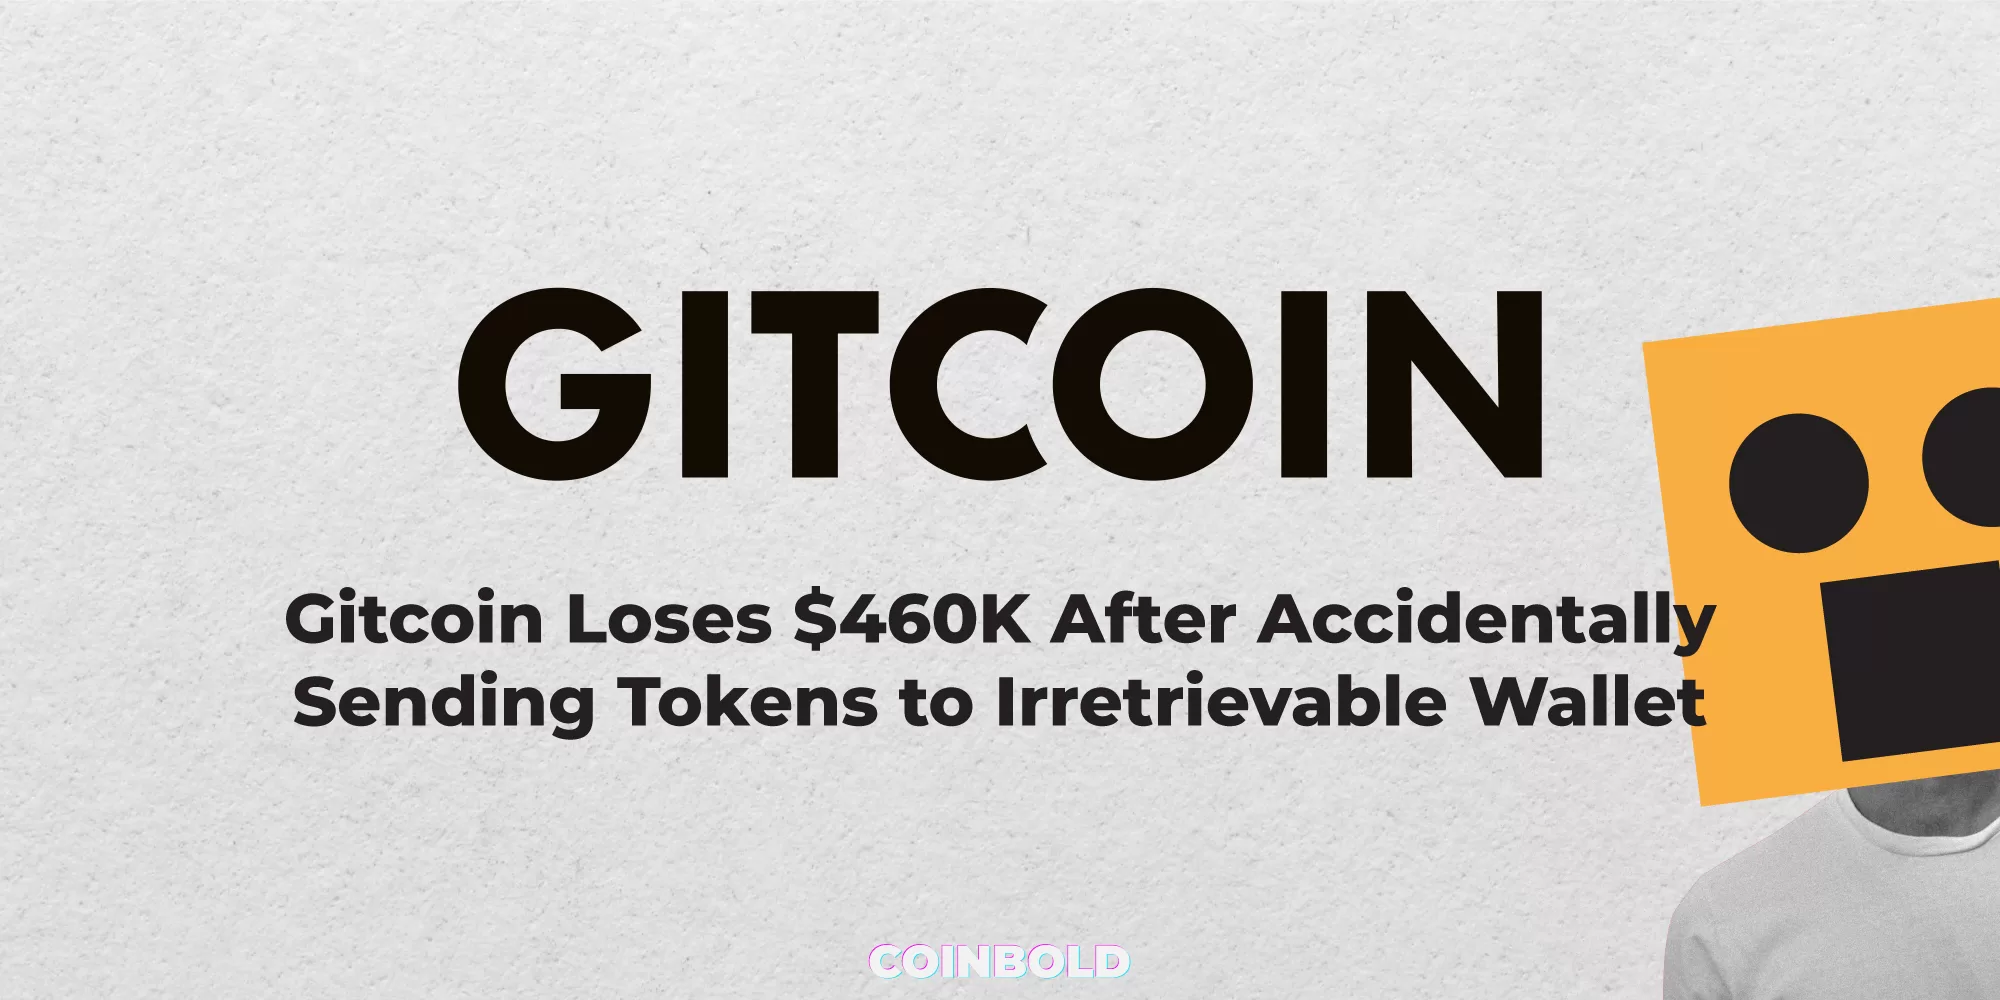 Gitcoin Loses $460K After Accidentally Sending Tokens to Irretrievable Wallet